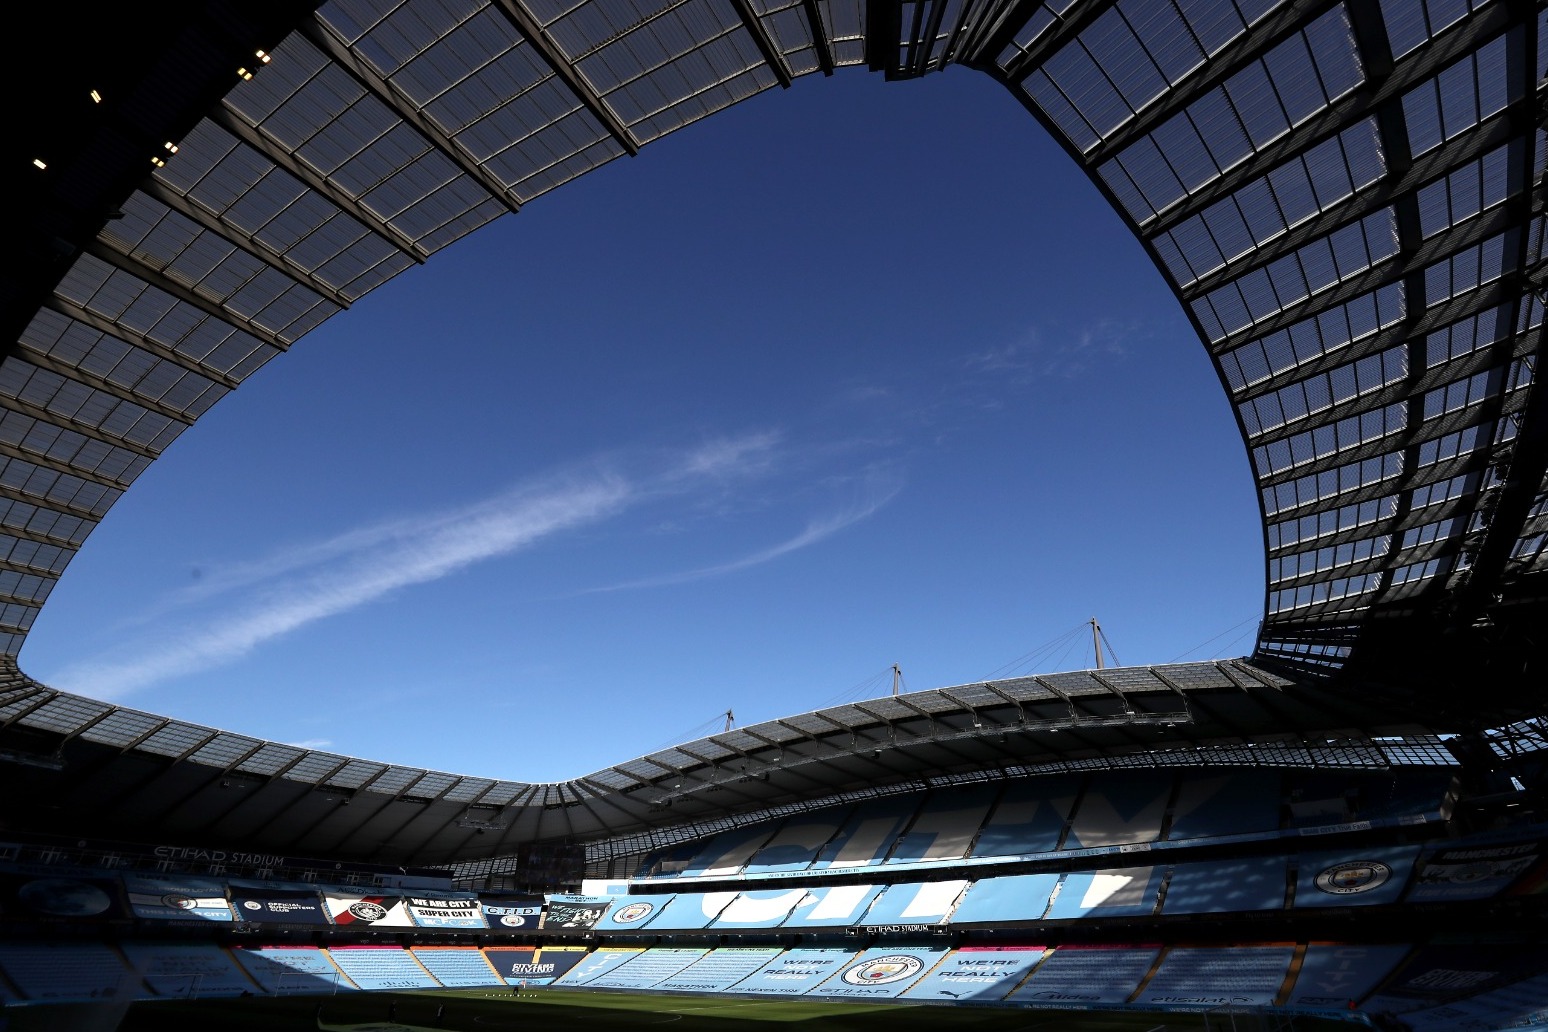 Manchester City exploring potential Etihad Stadium expansion to more than 60,000 